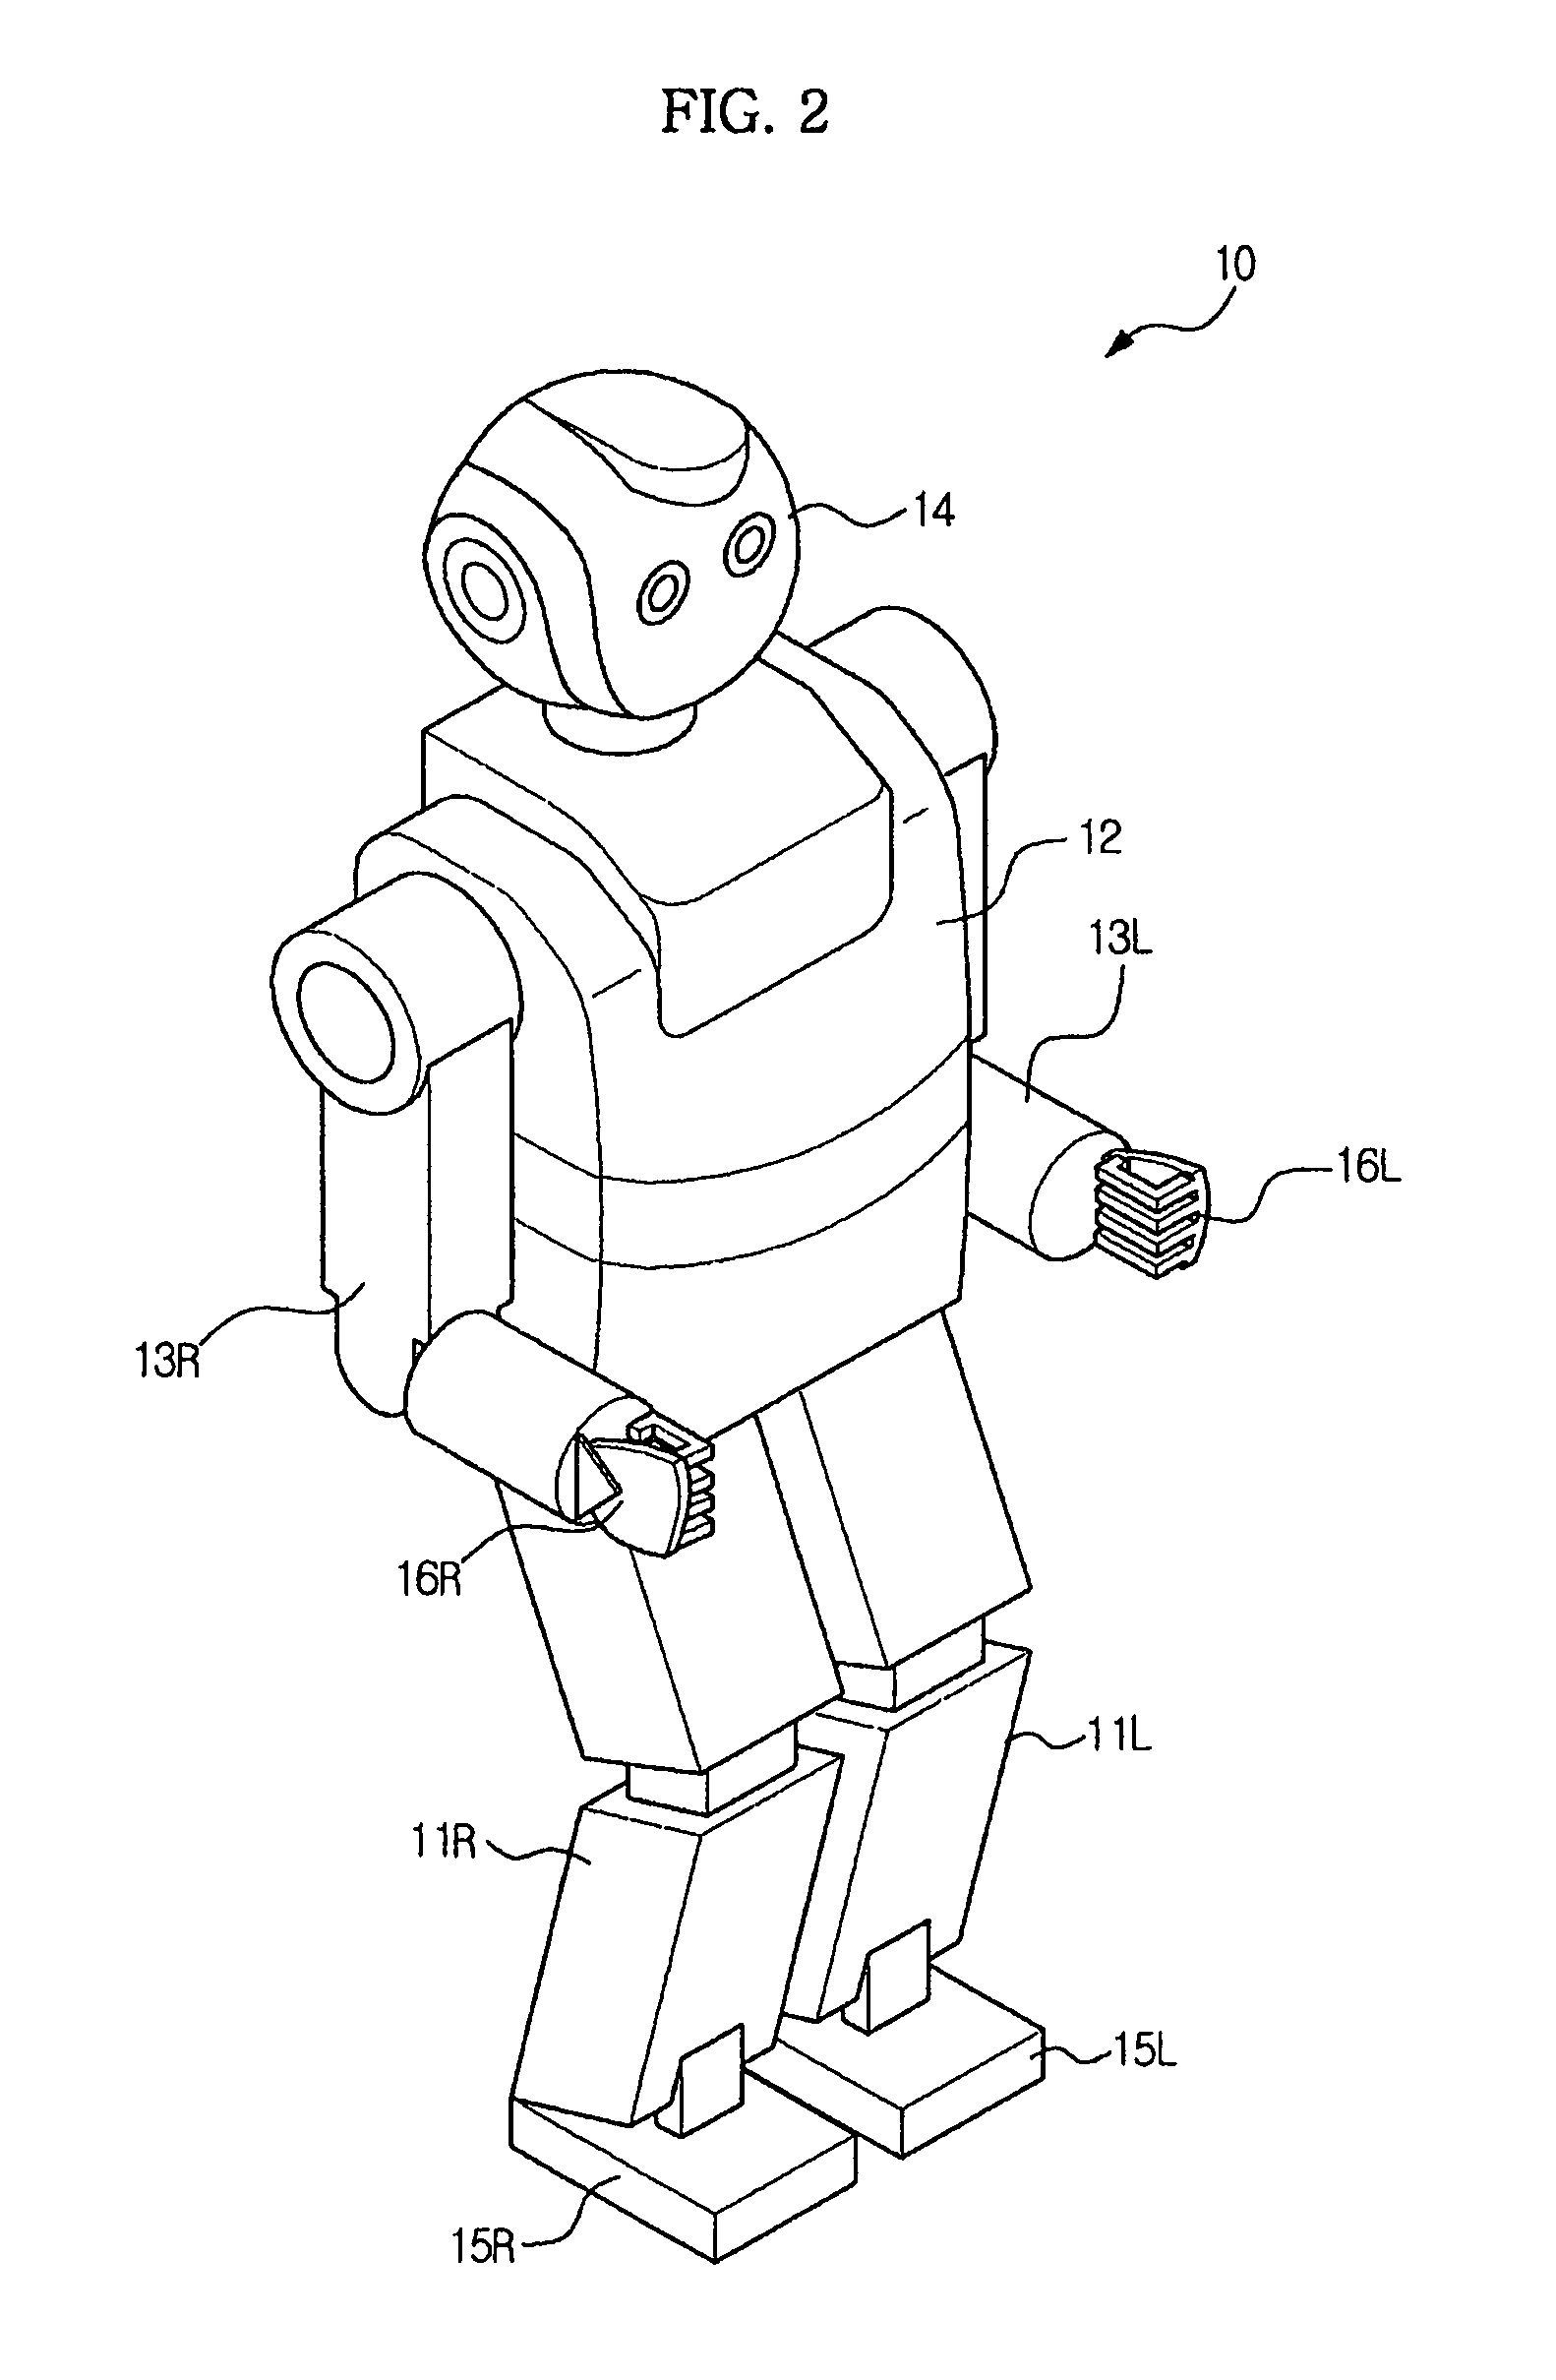 Robot and method of controlling walking thereof